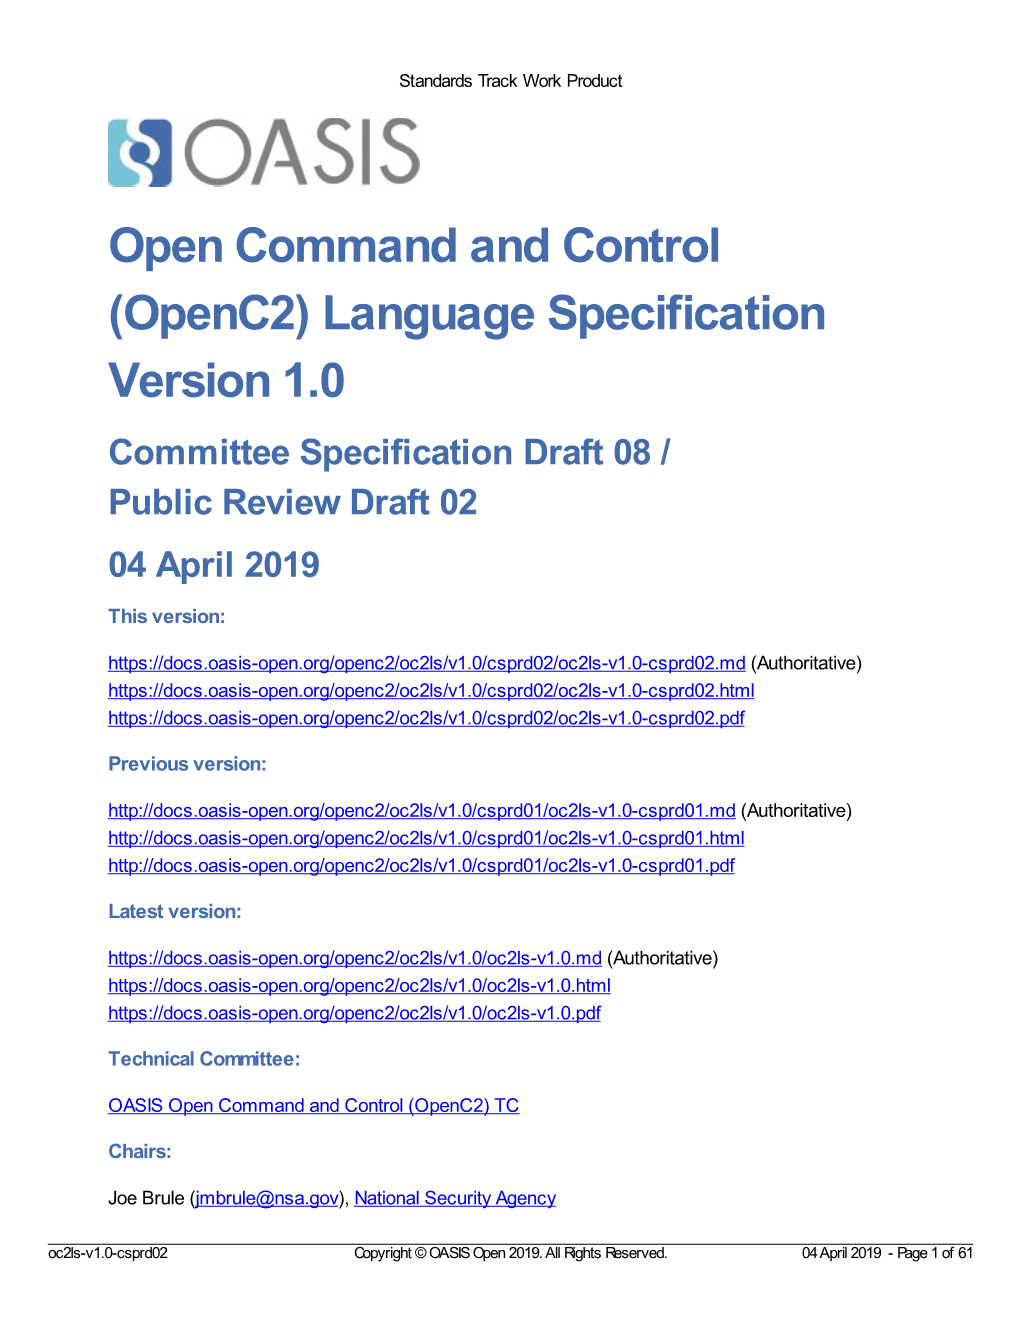 Openc2) Language Specification Version 1.0 Committee Specification Draft 08 / Public Review Draft 02 04 April 2019 This Version